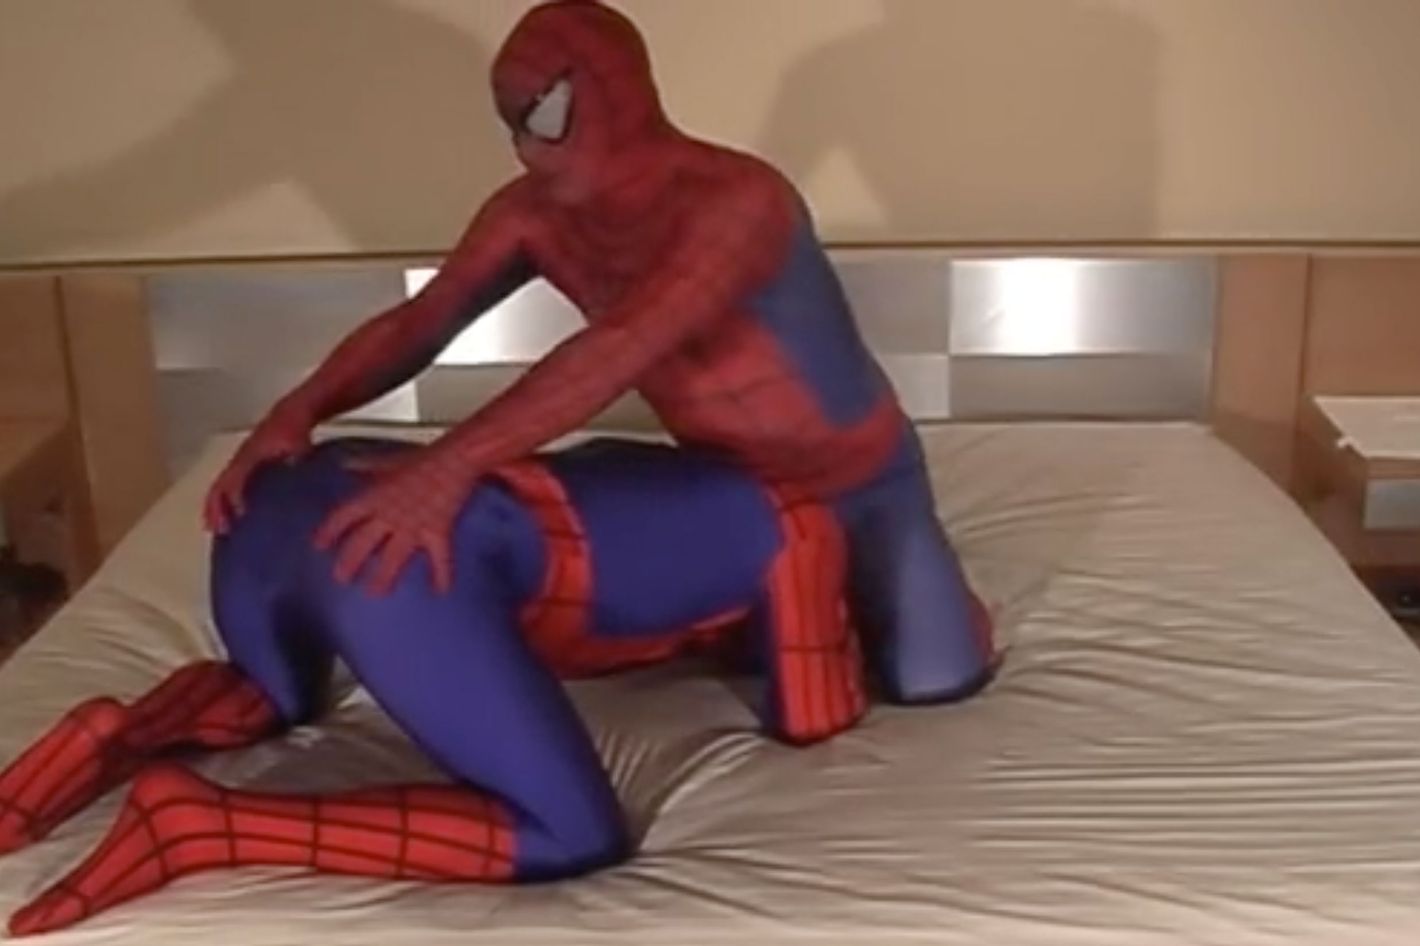 Japanese Spider Porn - Who Made the Viral Spider-Man Spanking Video?